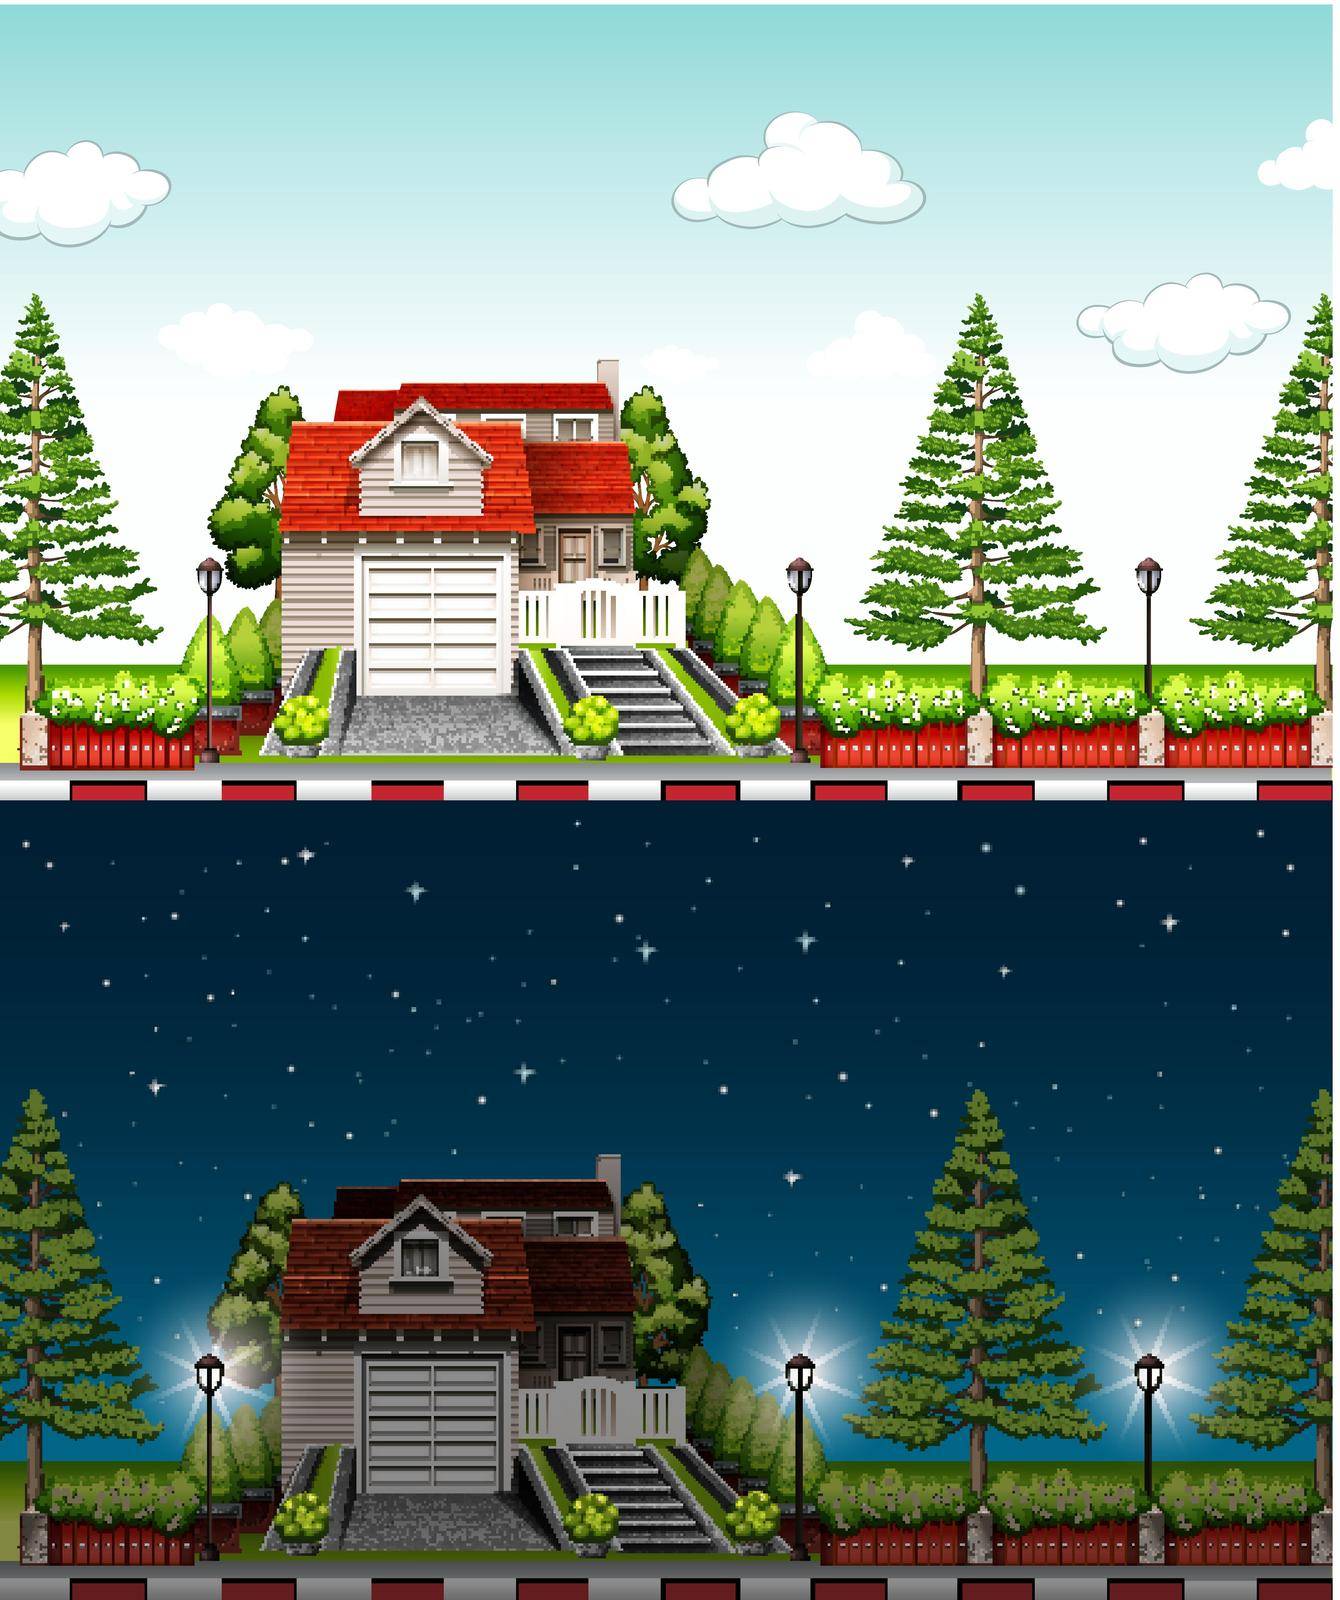 Private house at day time and night time illustration